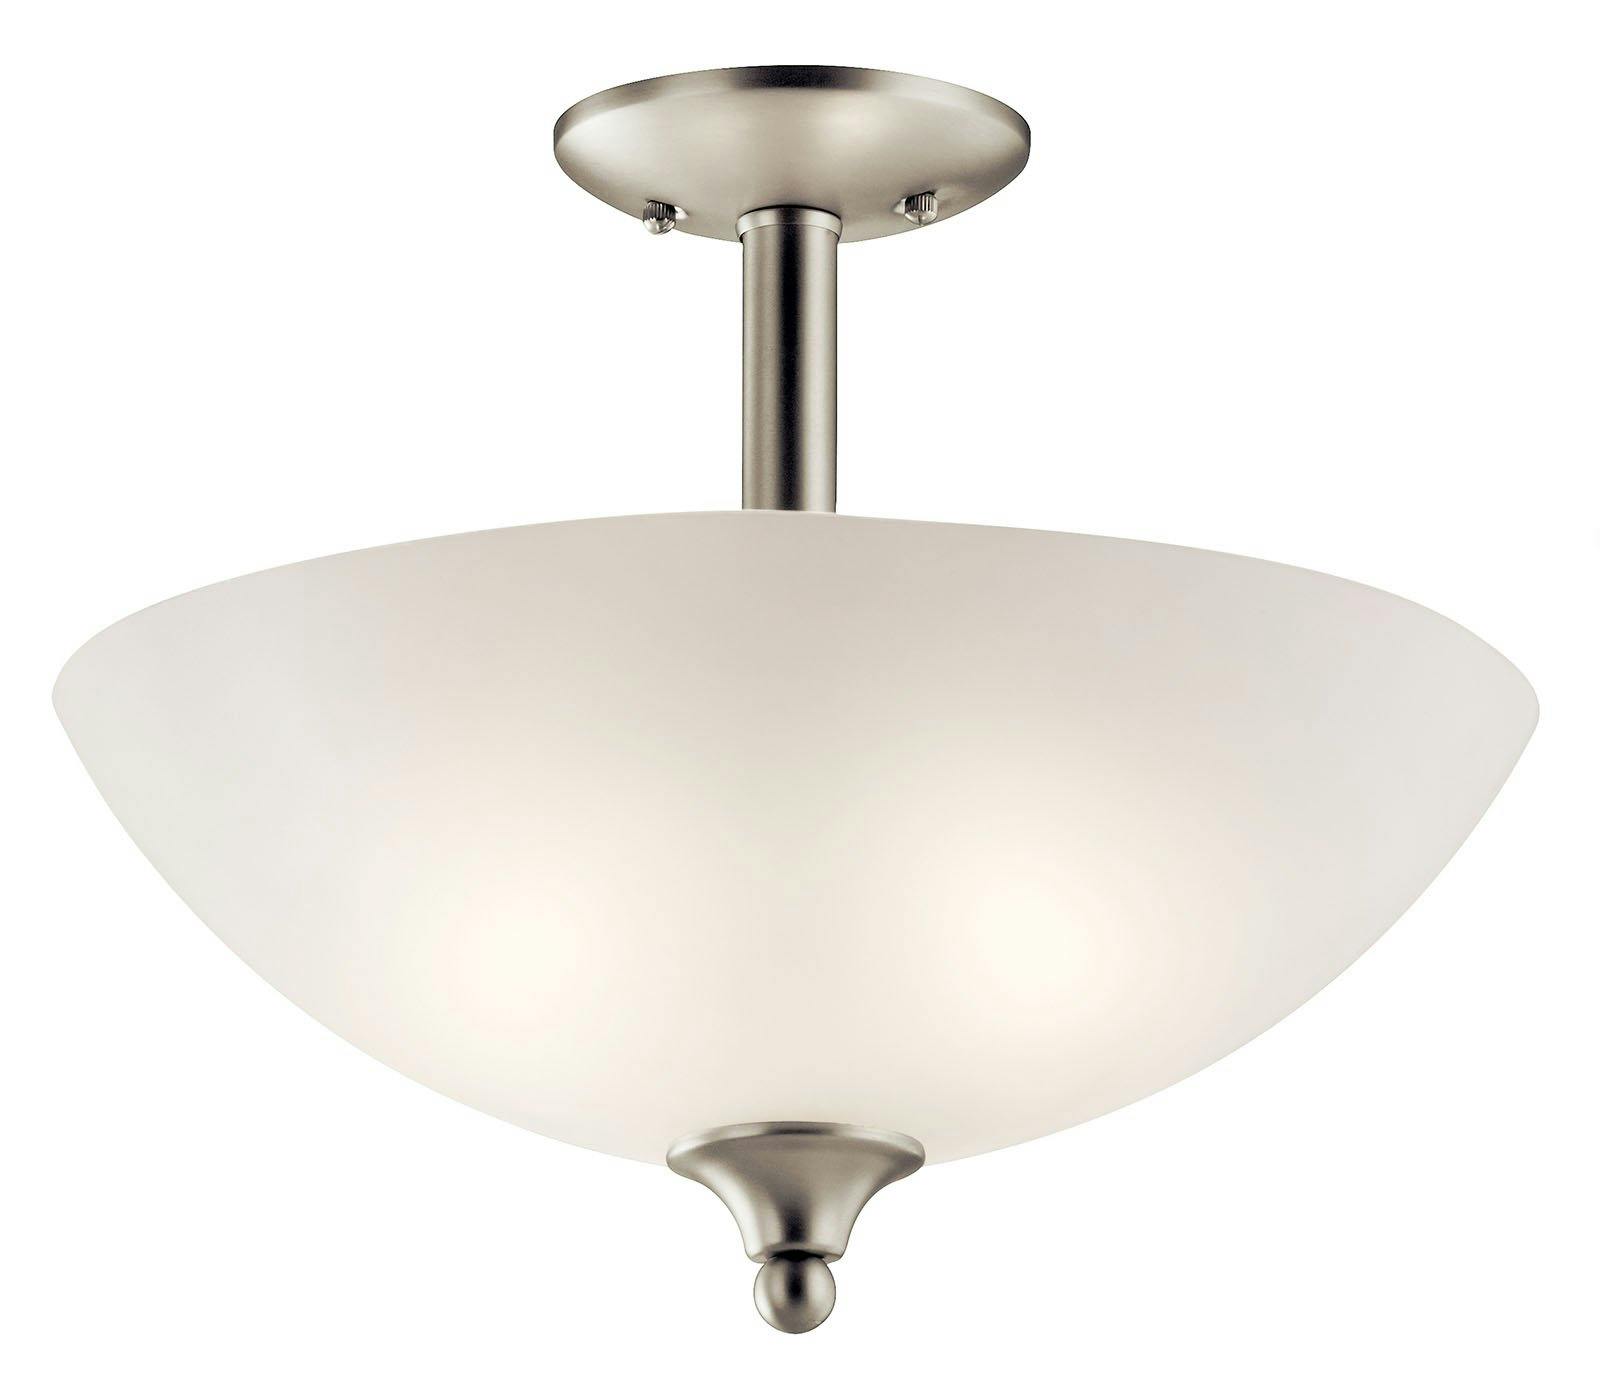 Jolie 15" Convertible Pendant Nickel shown as a semi-flush on a white background